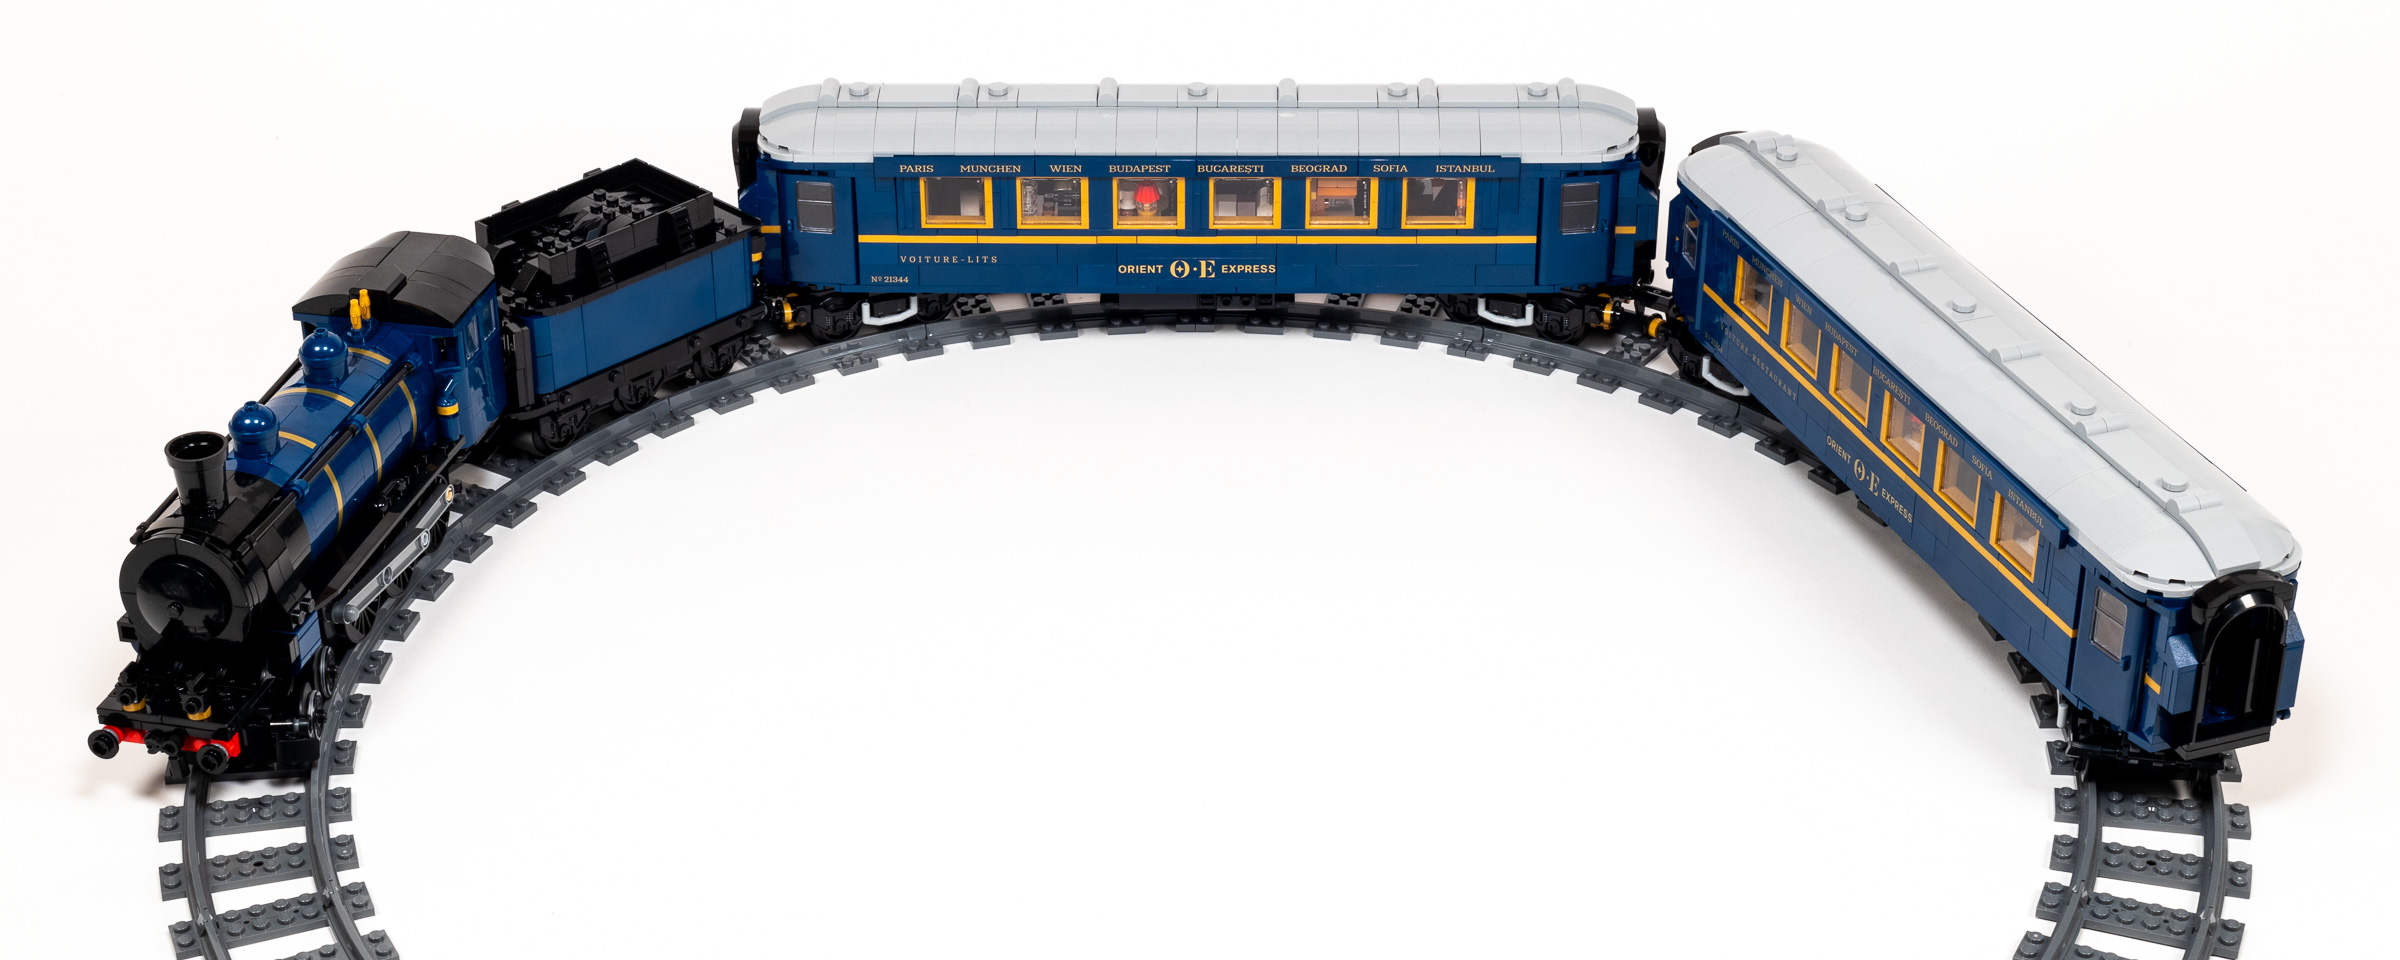 Review: #21344 The Orient Express (LEGO Ideas) - BRICK ARCHITECT